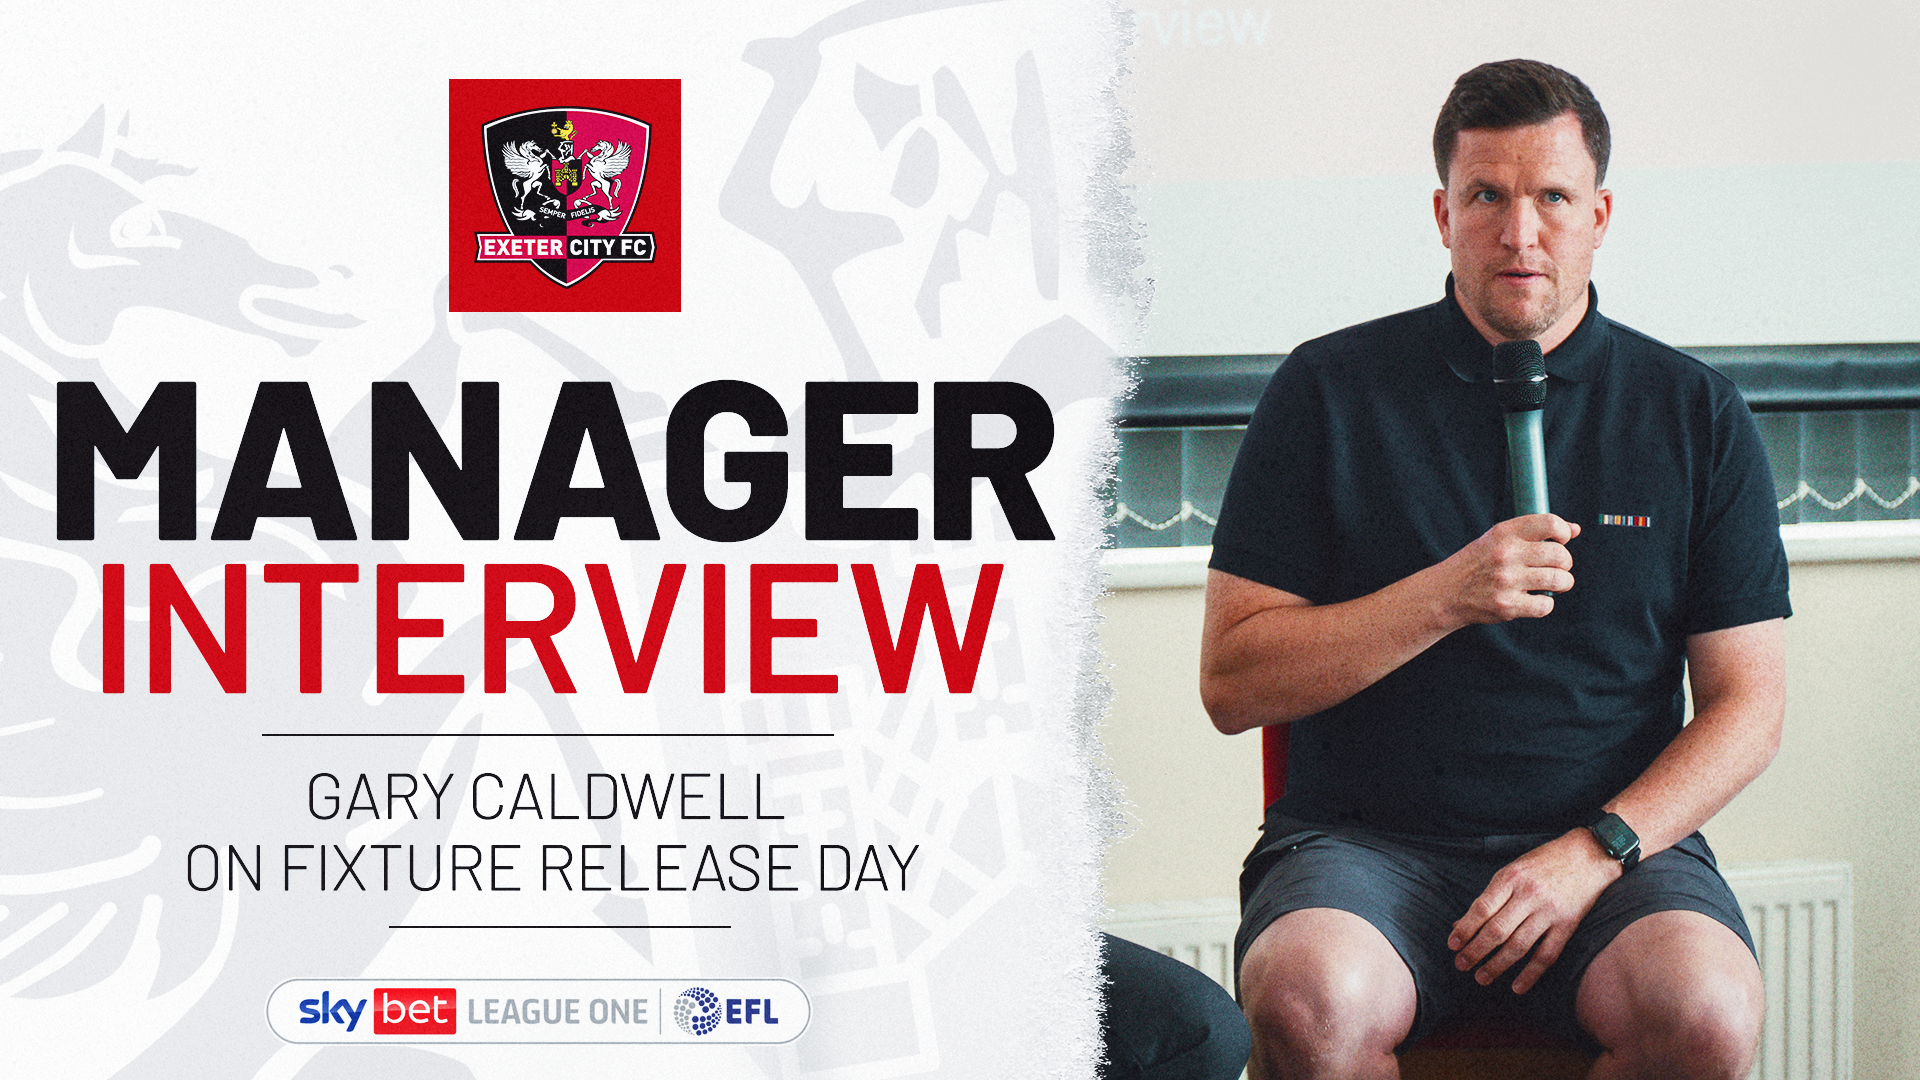 Manager interview image of Gary Caldwell with the works 'Gary Caldwell on fixture release day'